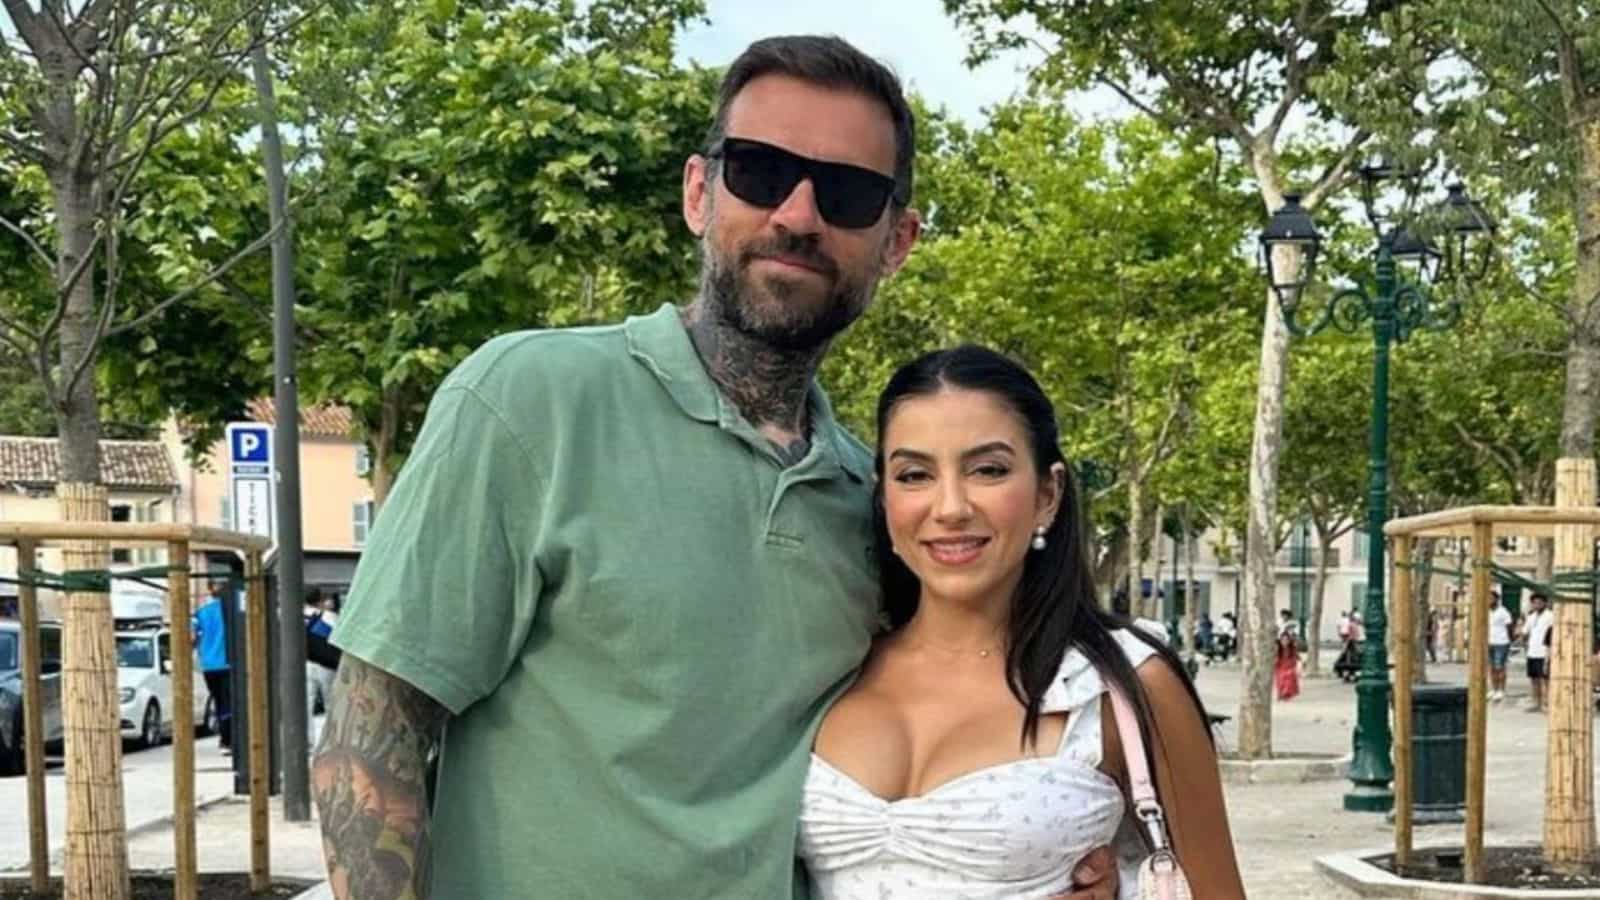 Who is Adam22’s wife